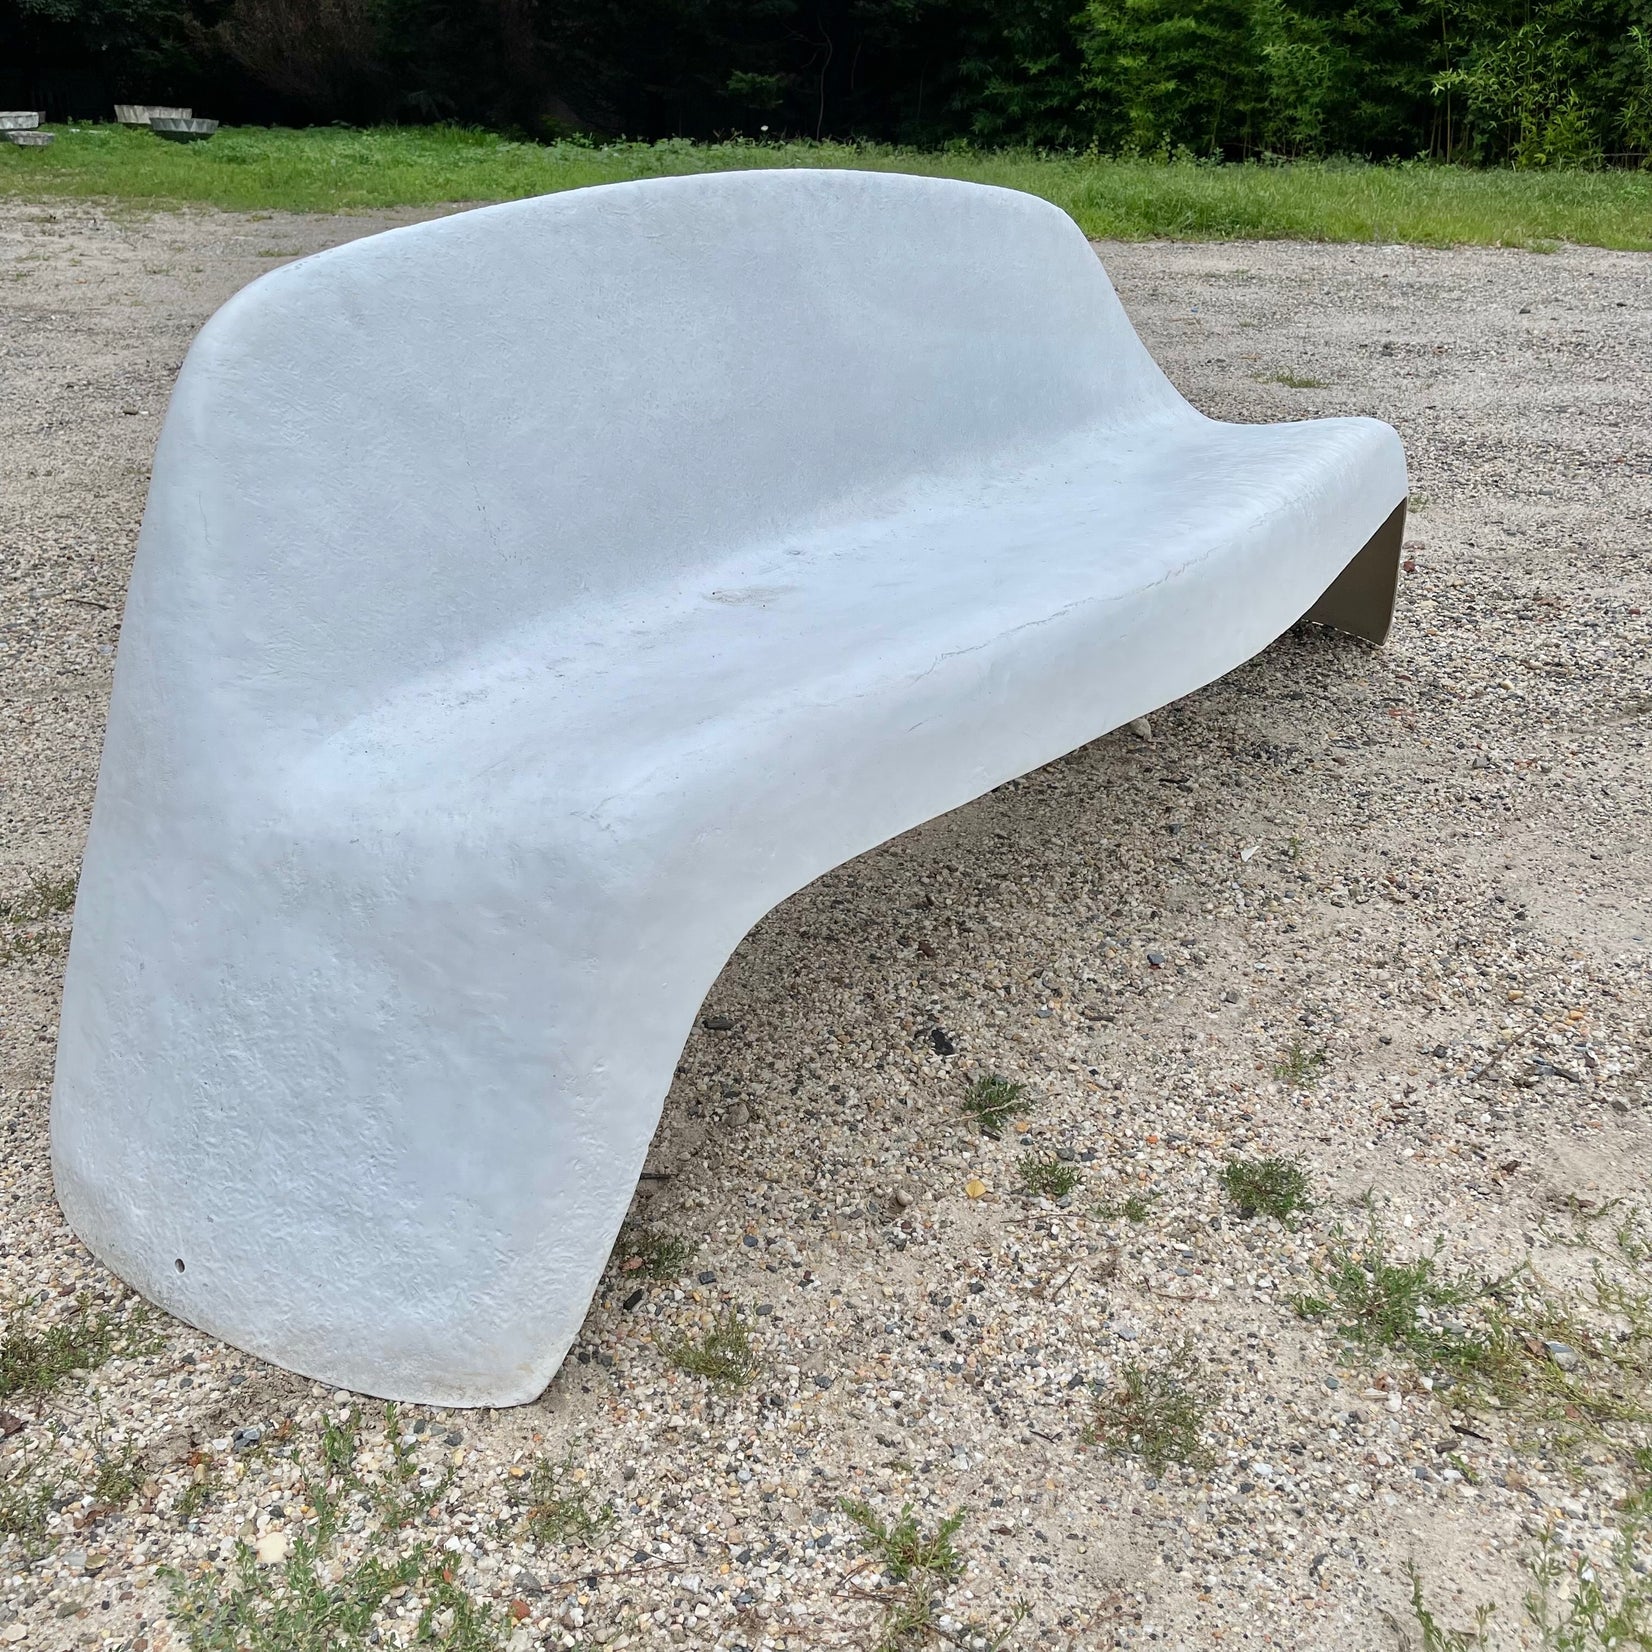 Sculptural Outdoor Fiberglass Bench by Walter Papst, 1960s Germany